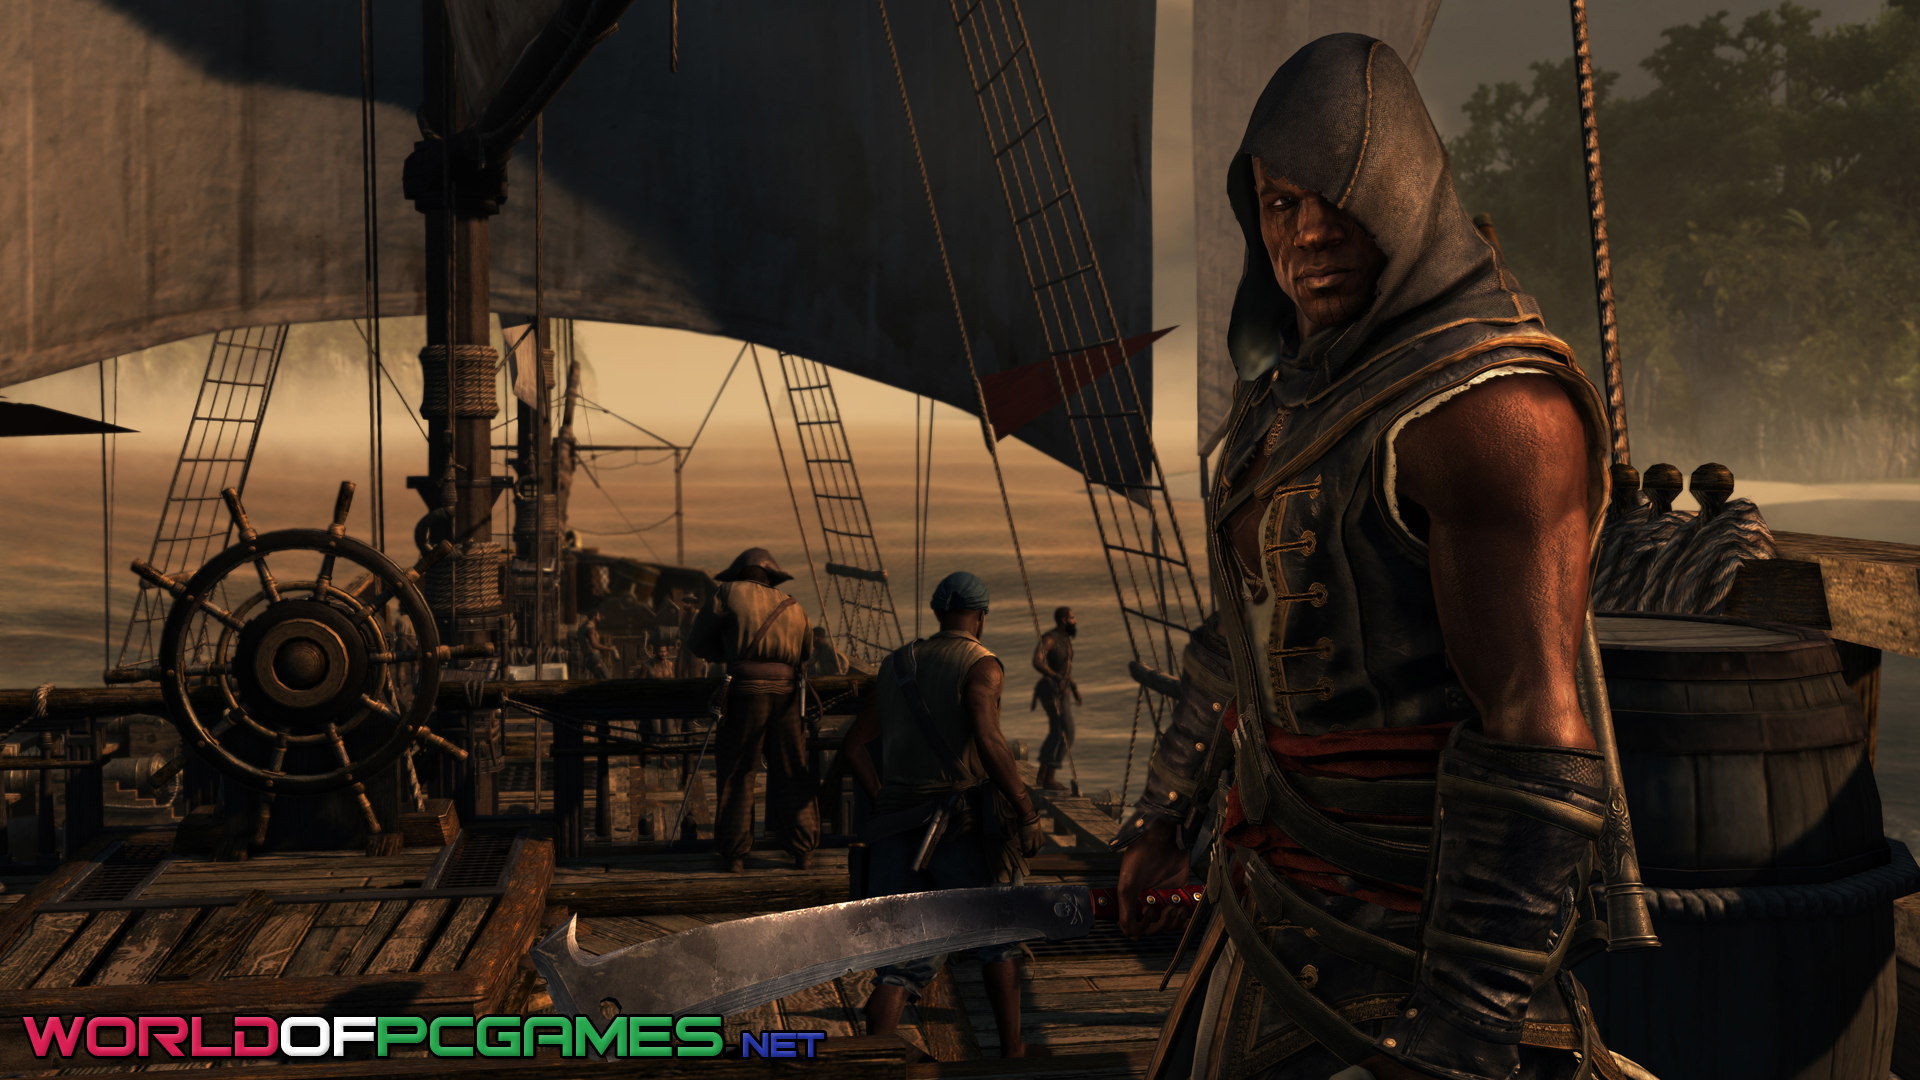 Assassins Creed Freedom Cry Free Download By worldof-pcgames.net